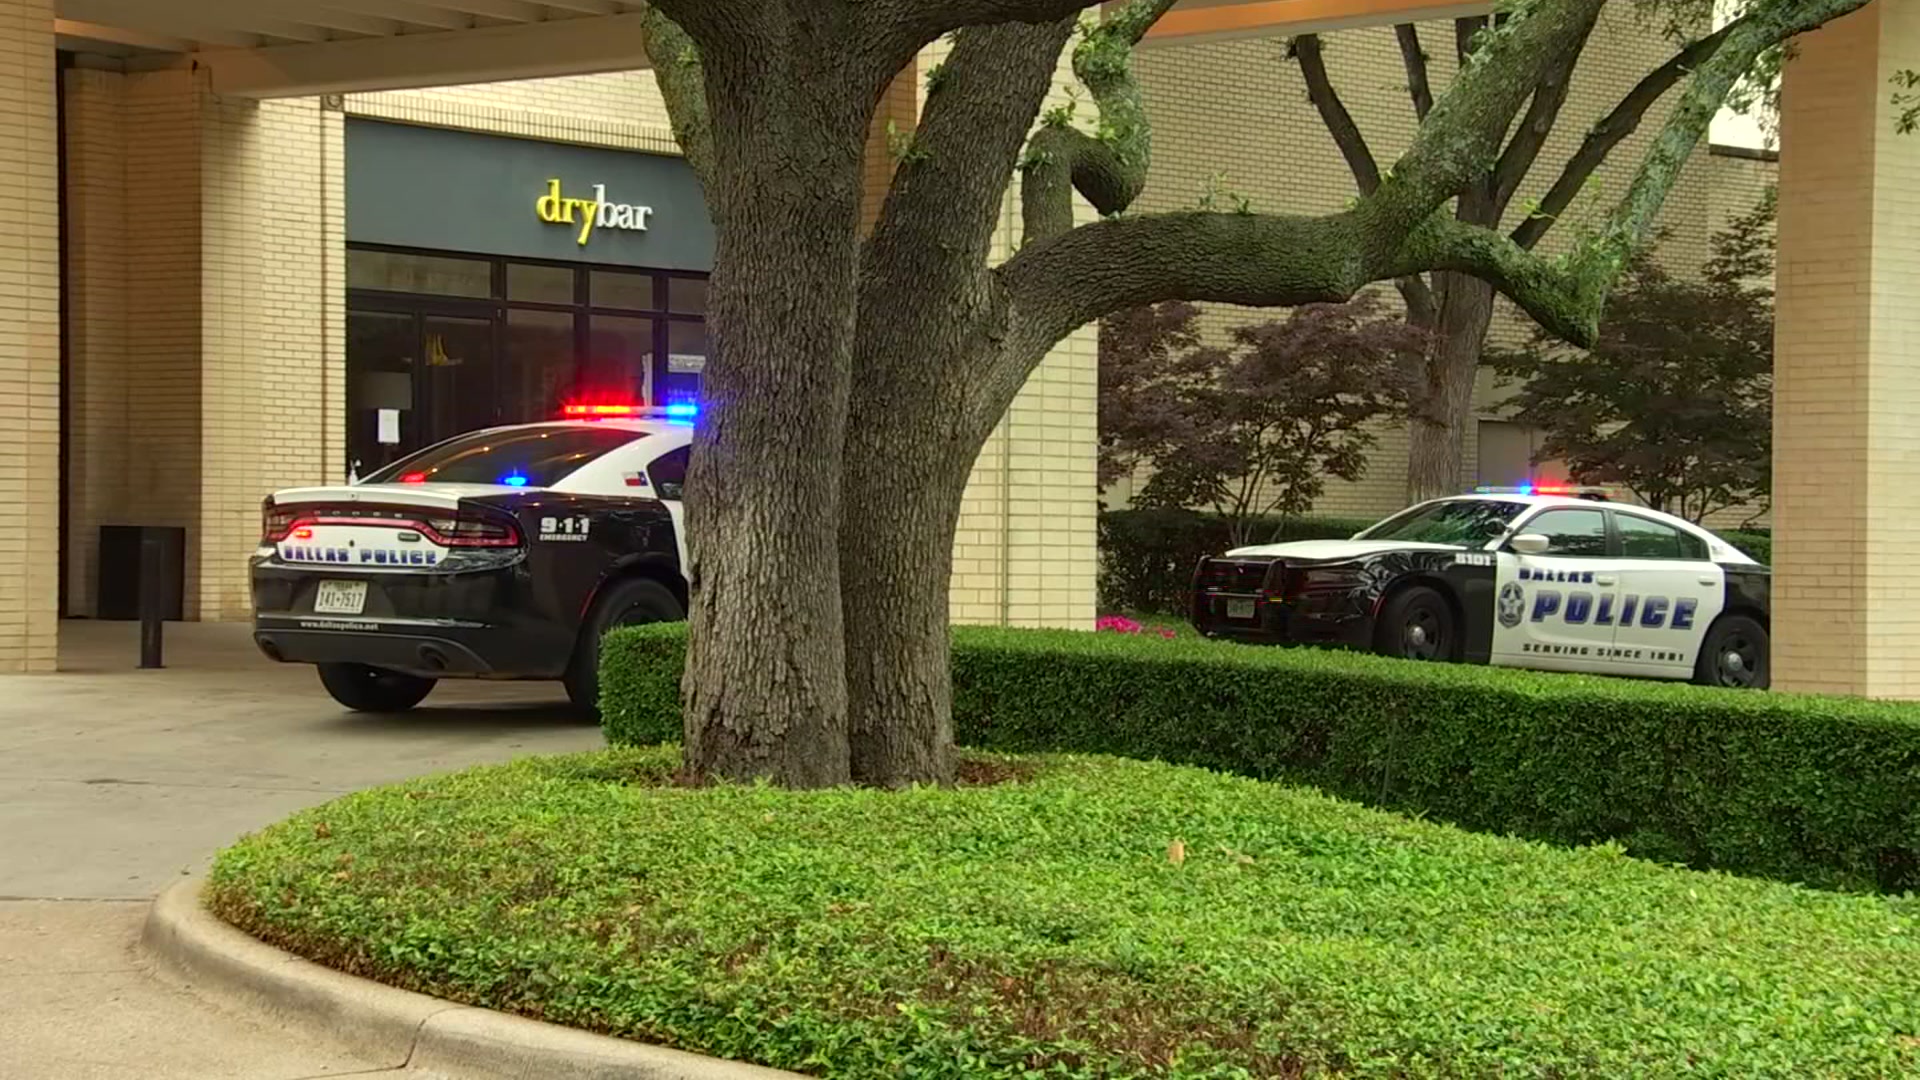 No Shots Fired After Reports of NorthPark Center Shooting – NBC 5